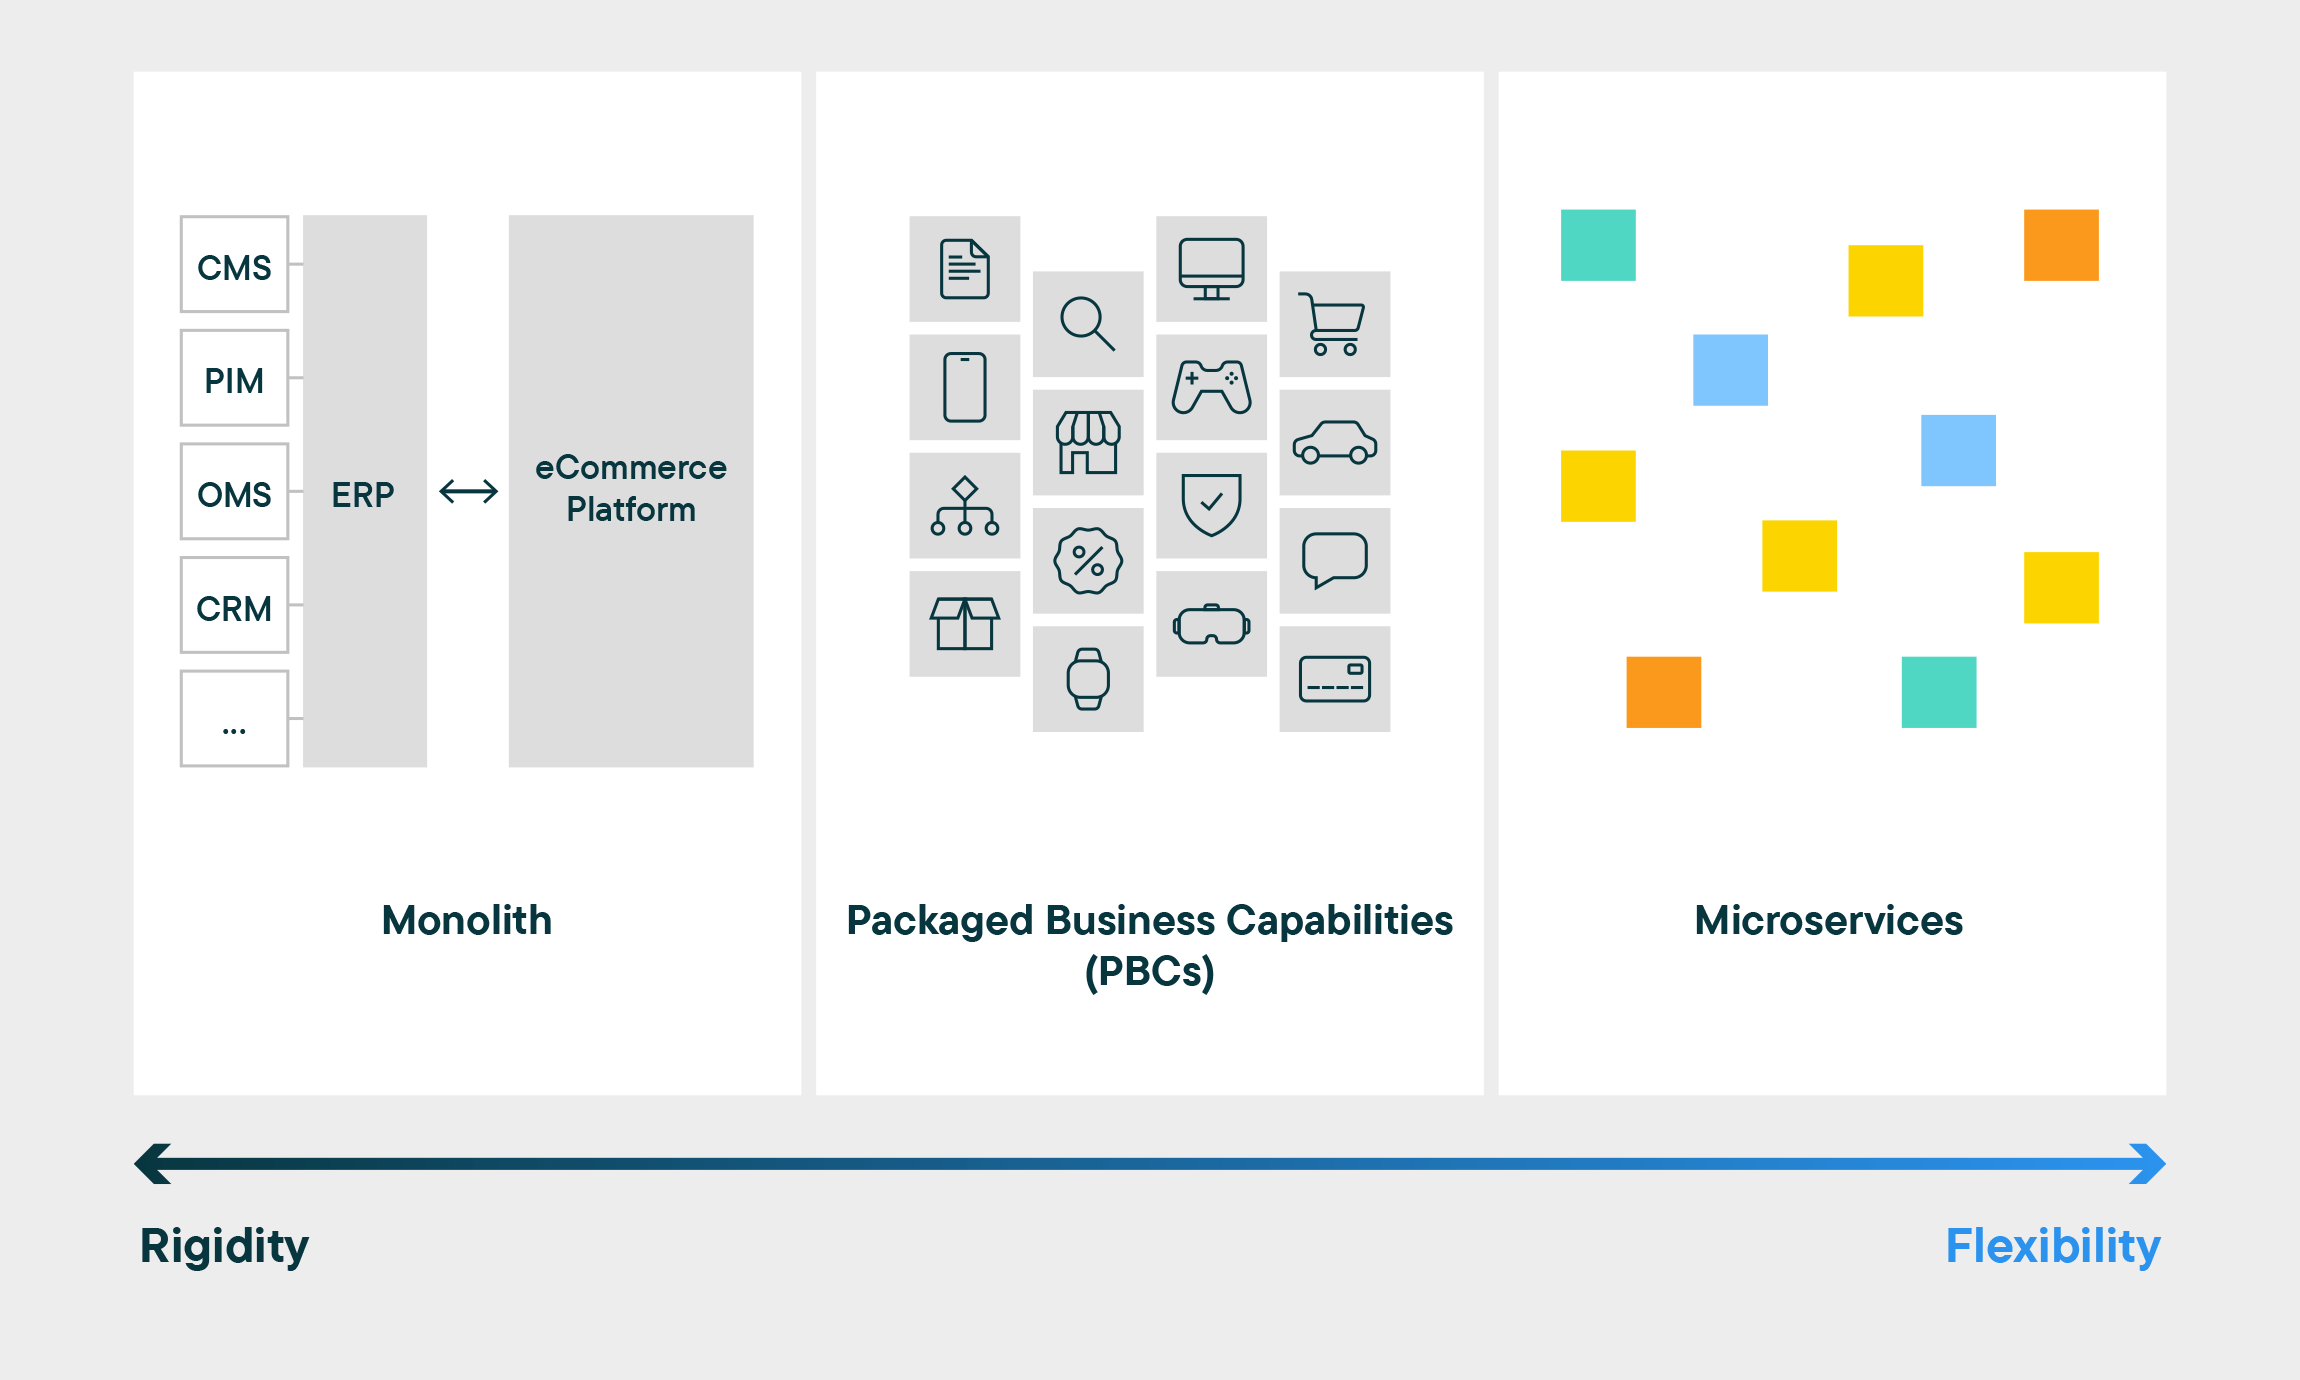 How packaged business capabilities (PBCs) and microservices compare